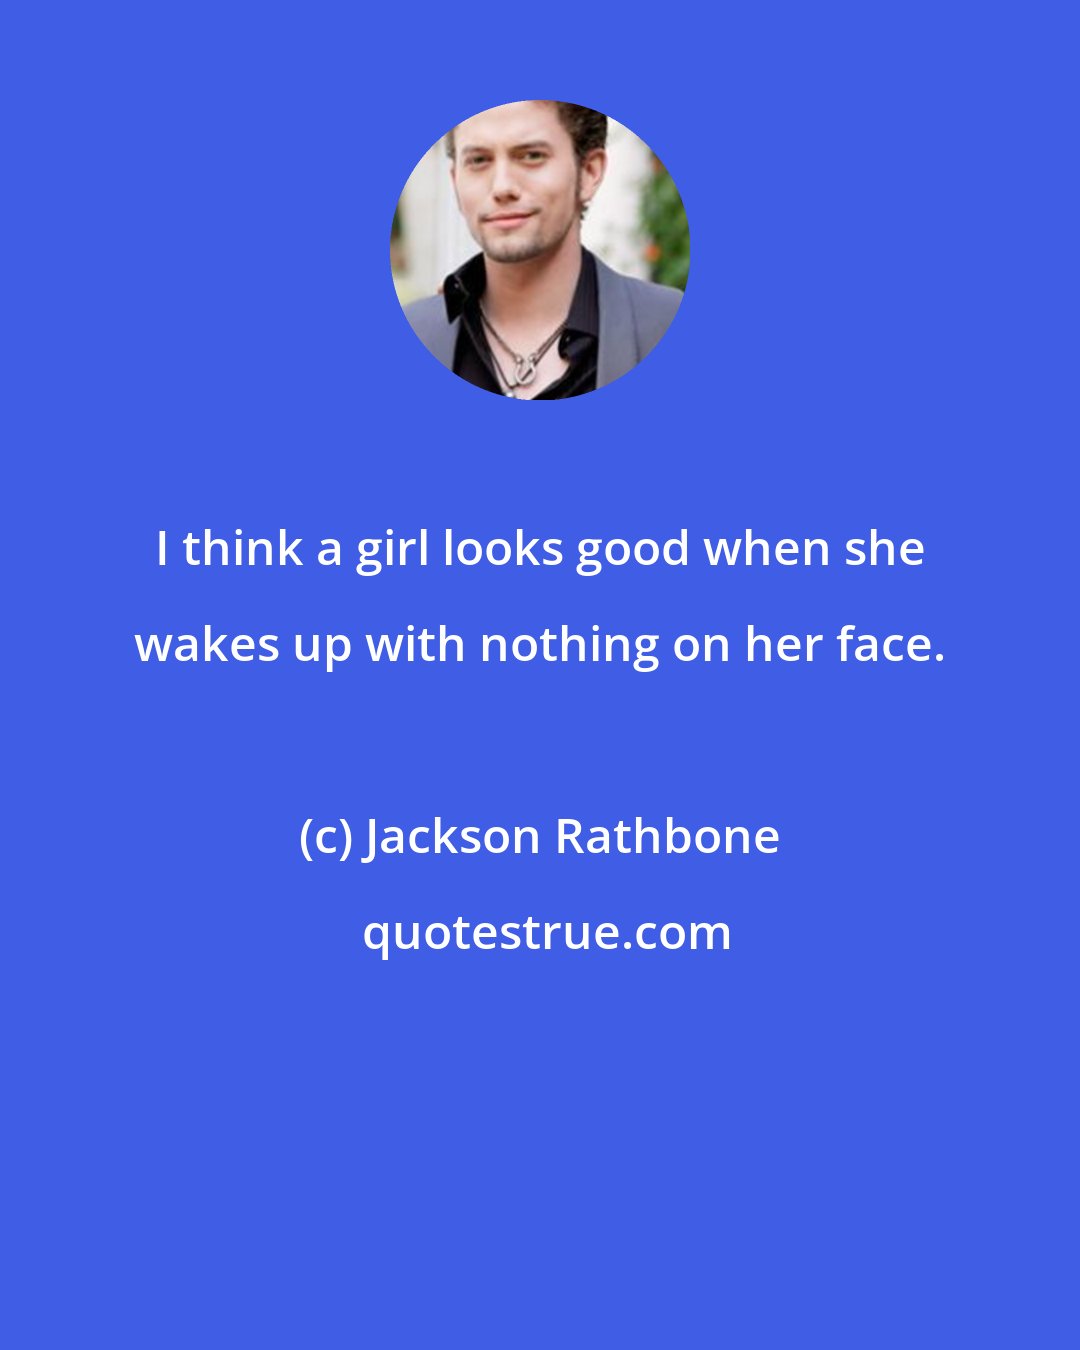 Jackson Rathbone: I think a girl looks good when she wakes up with nothing on her face.